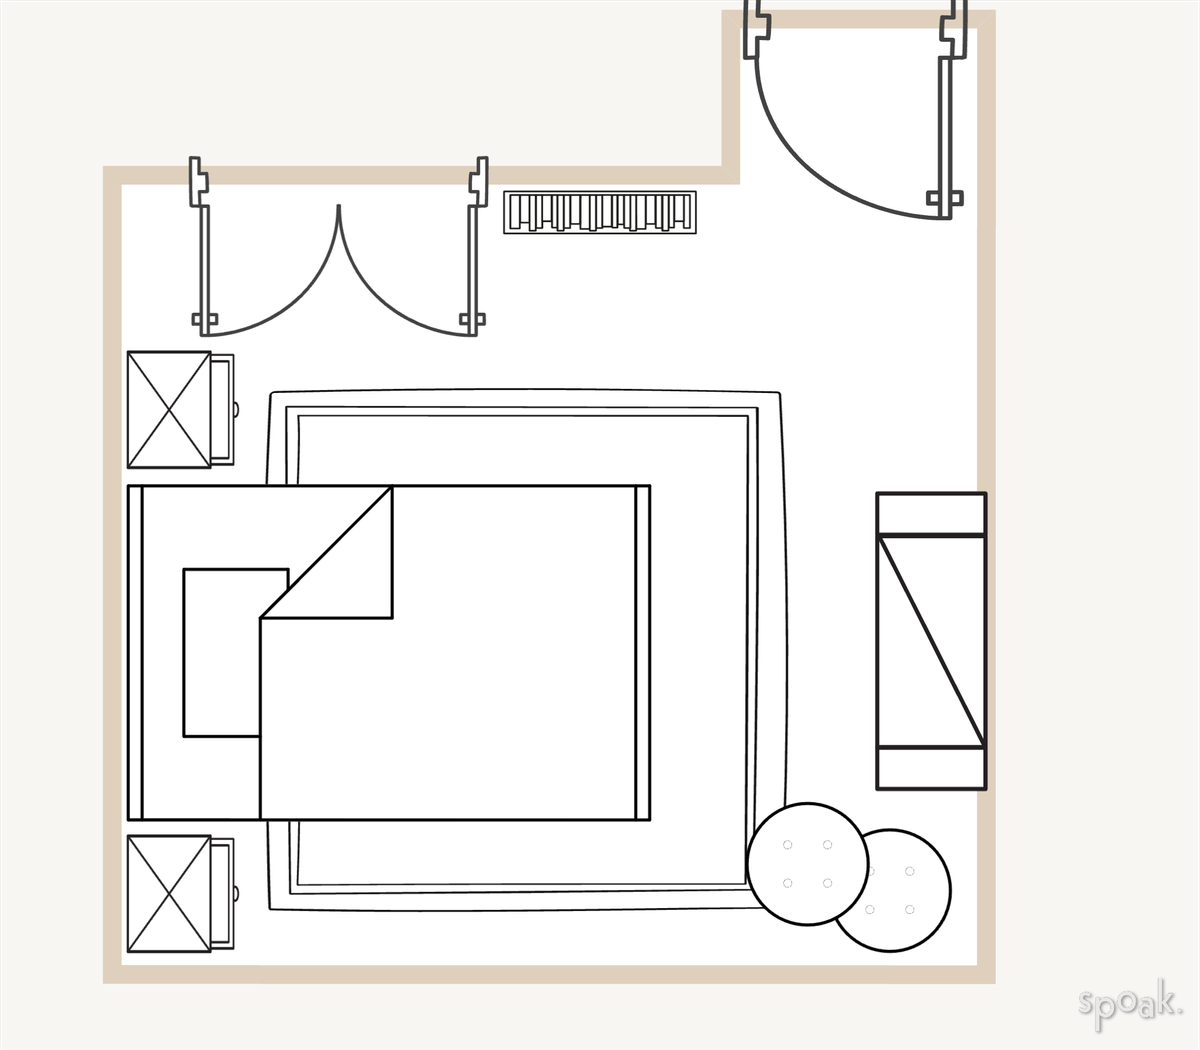 Bedroom Layout designed by Chandler Beasley